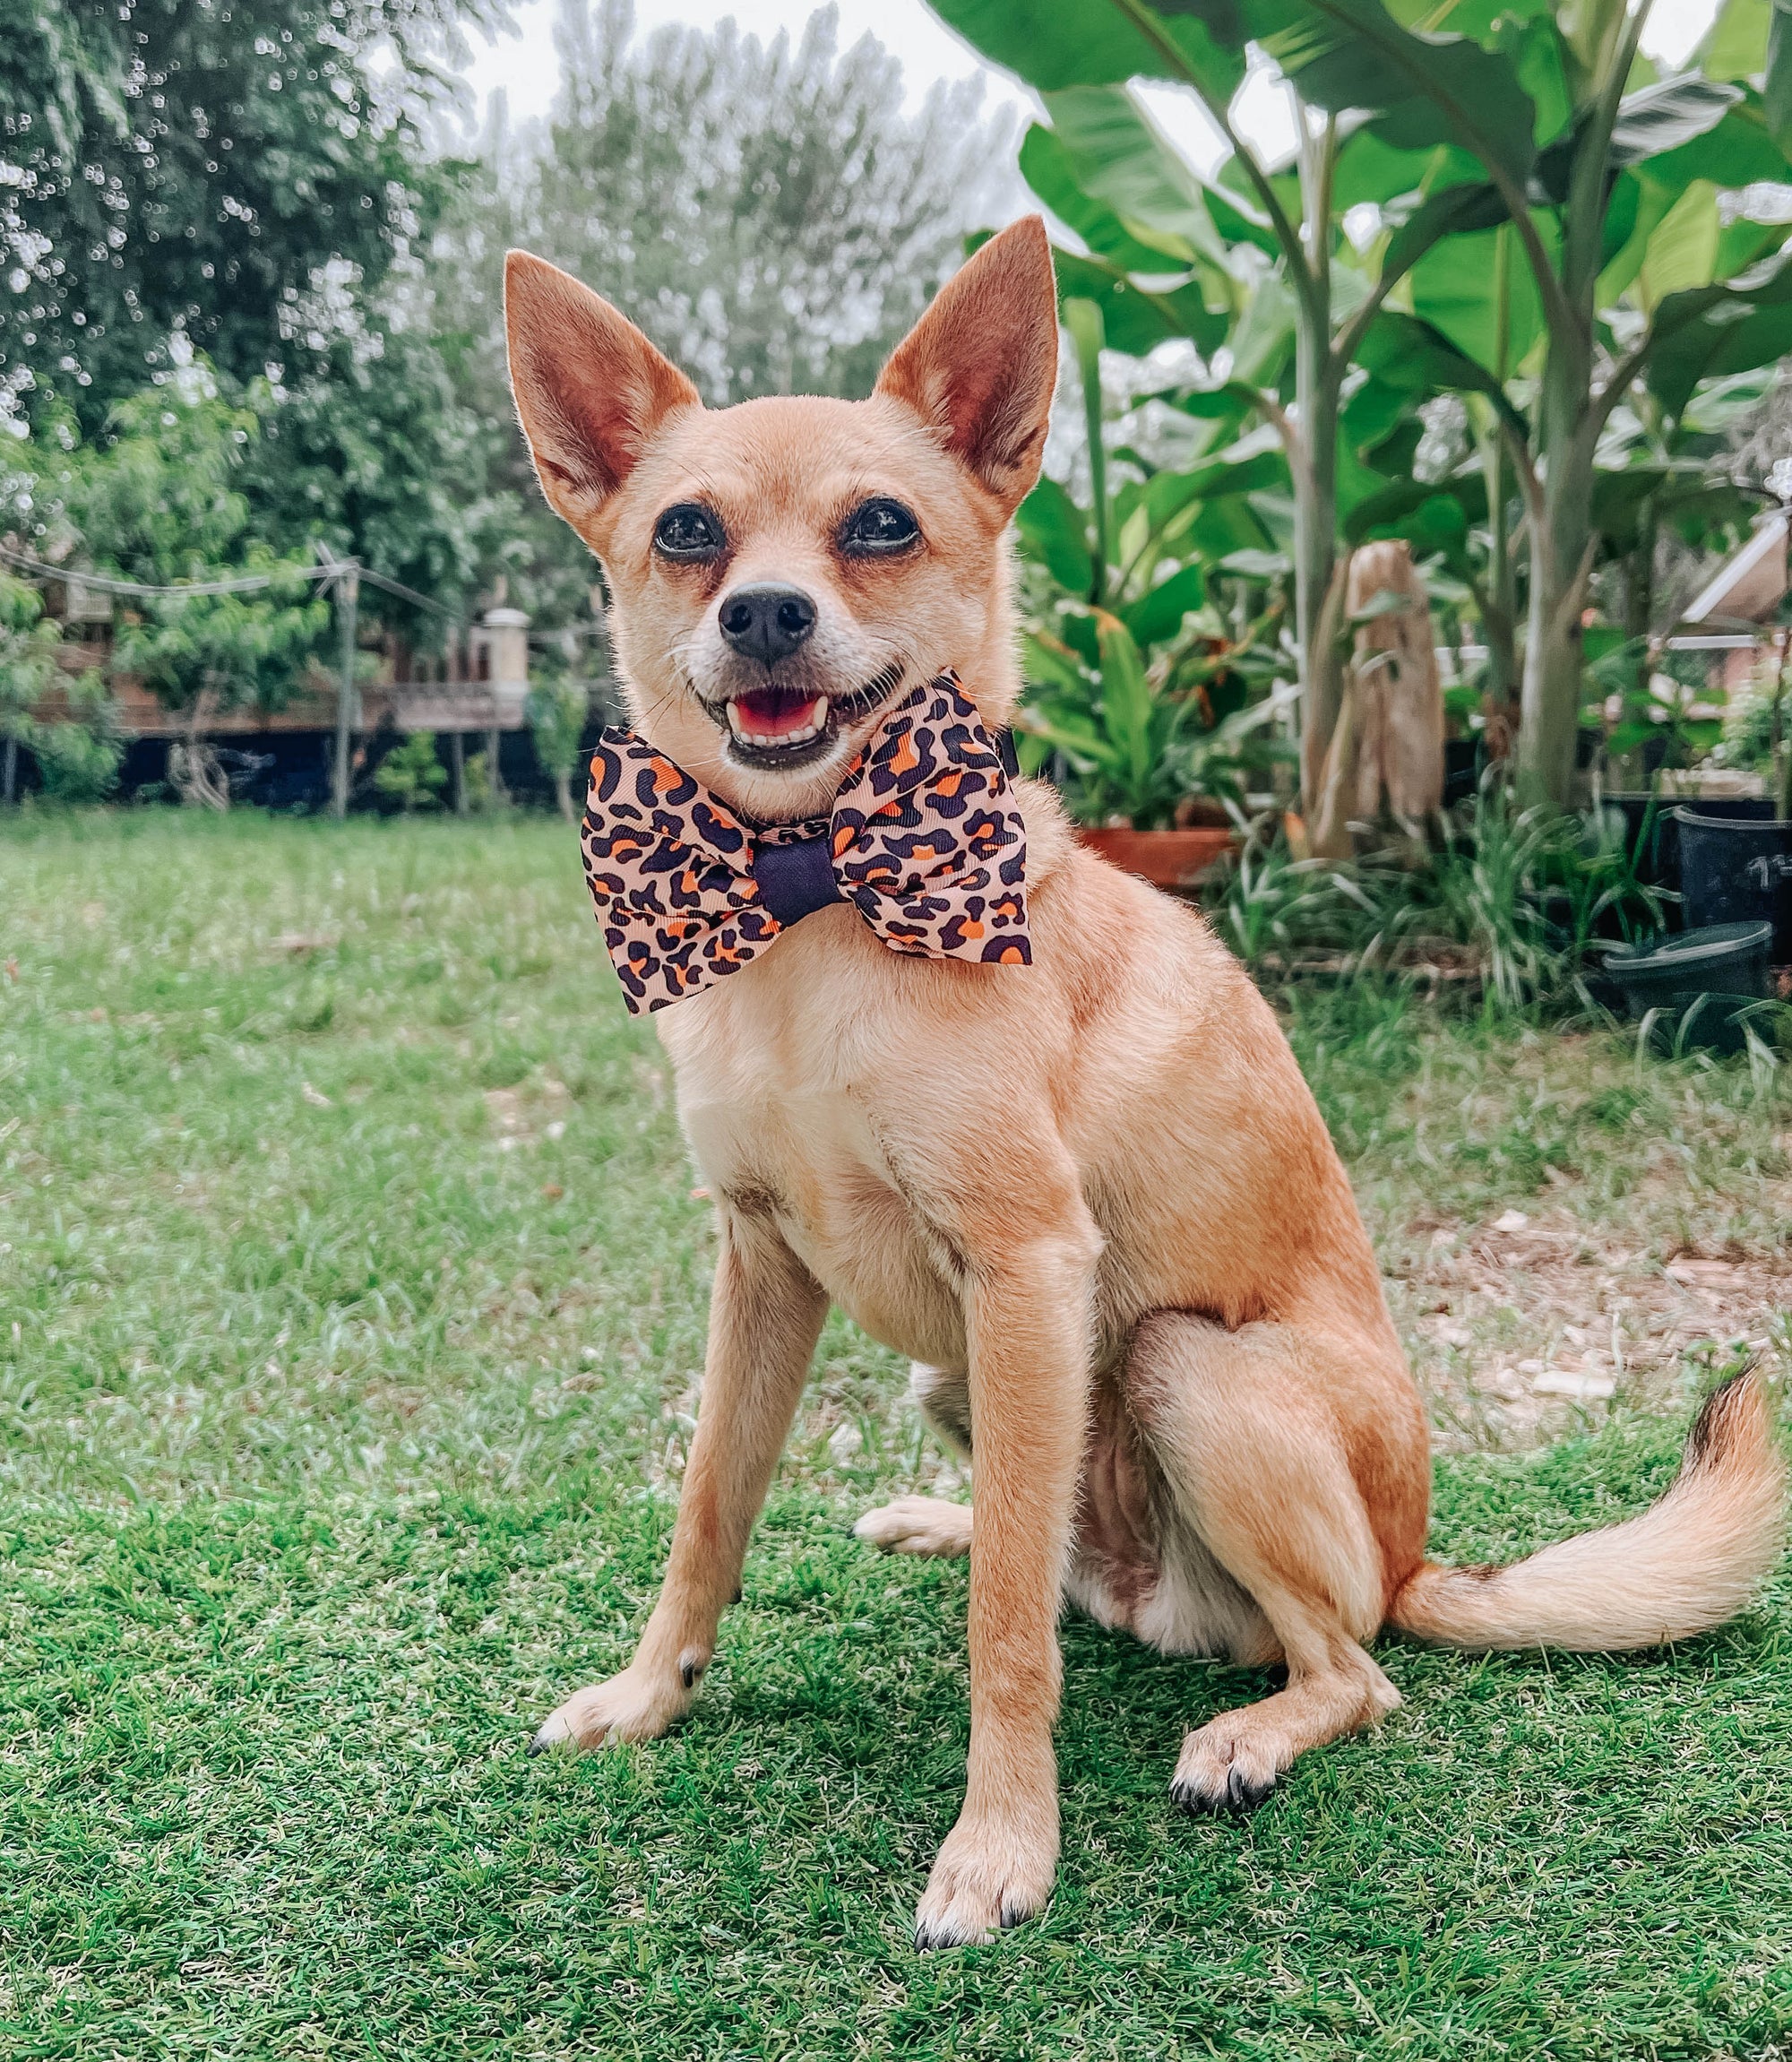 INFLUENCER_CONTENT | @MARILYNCHIHUAHUA